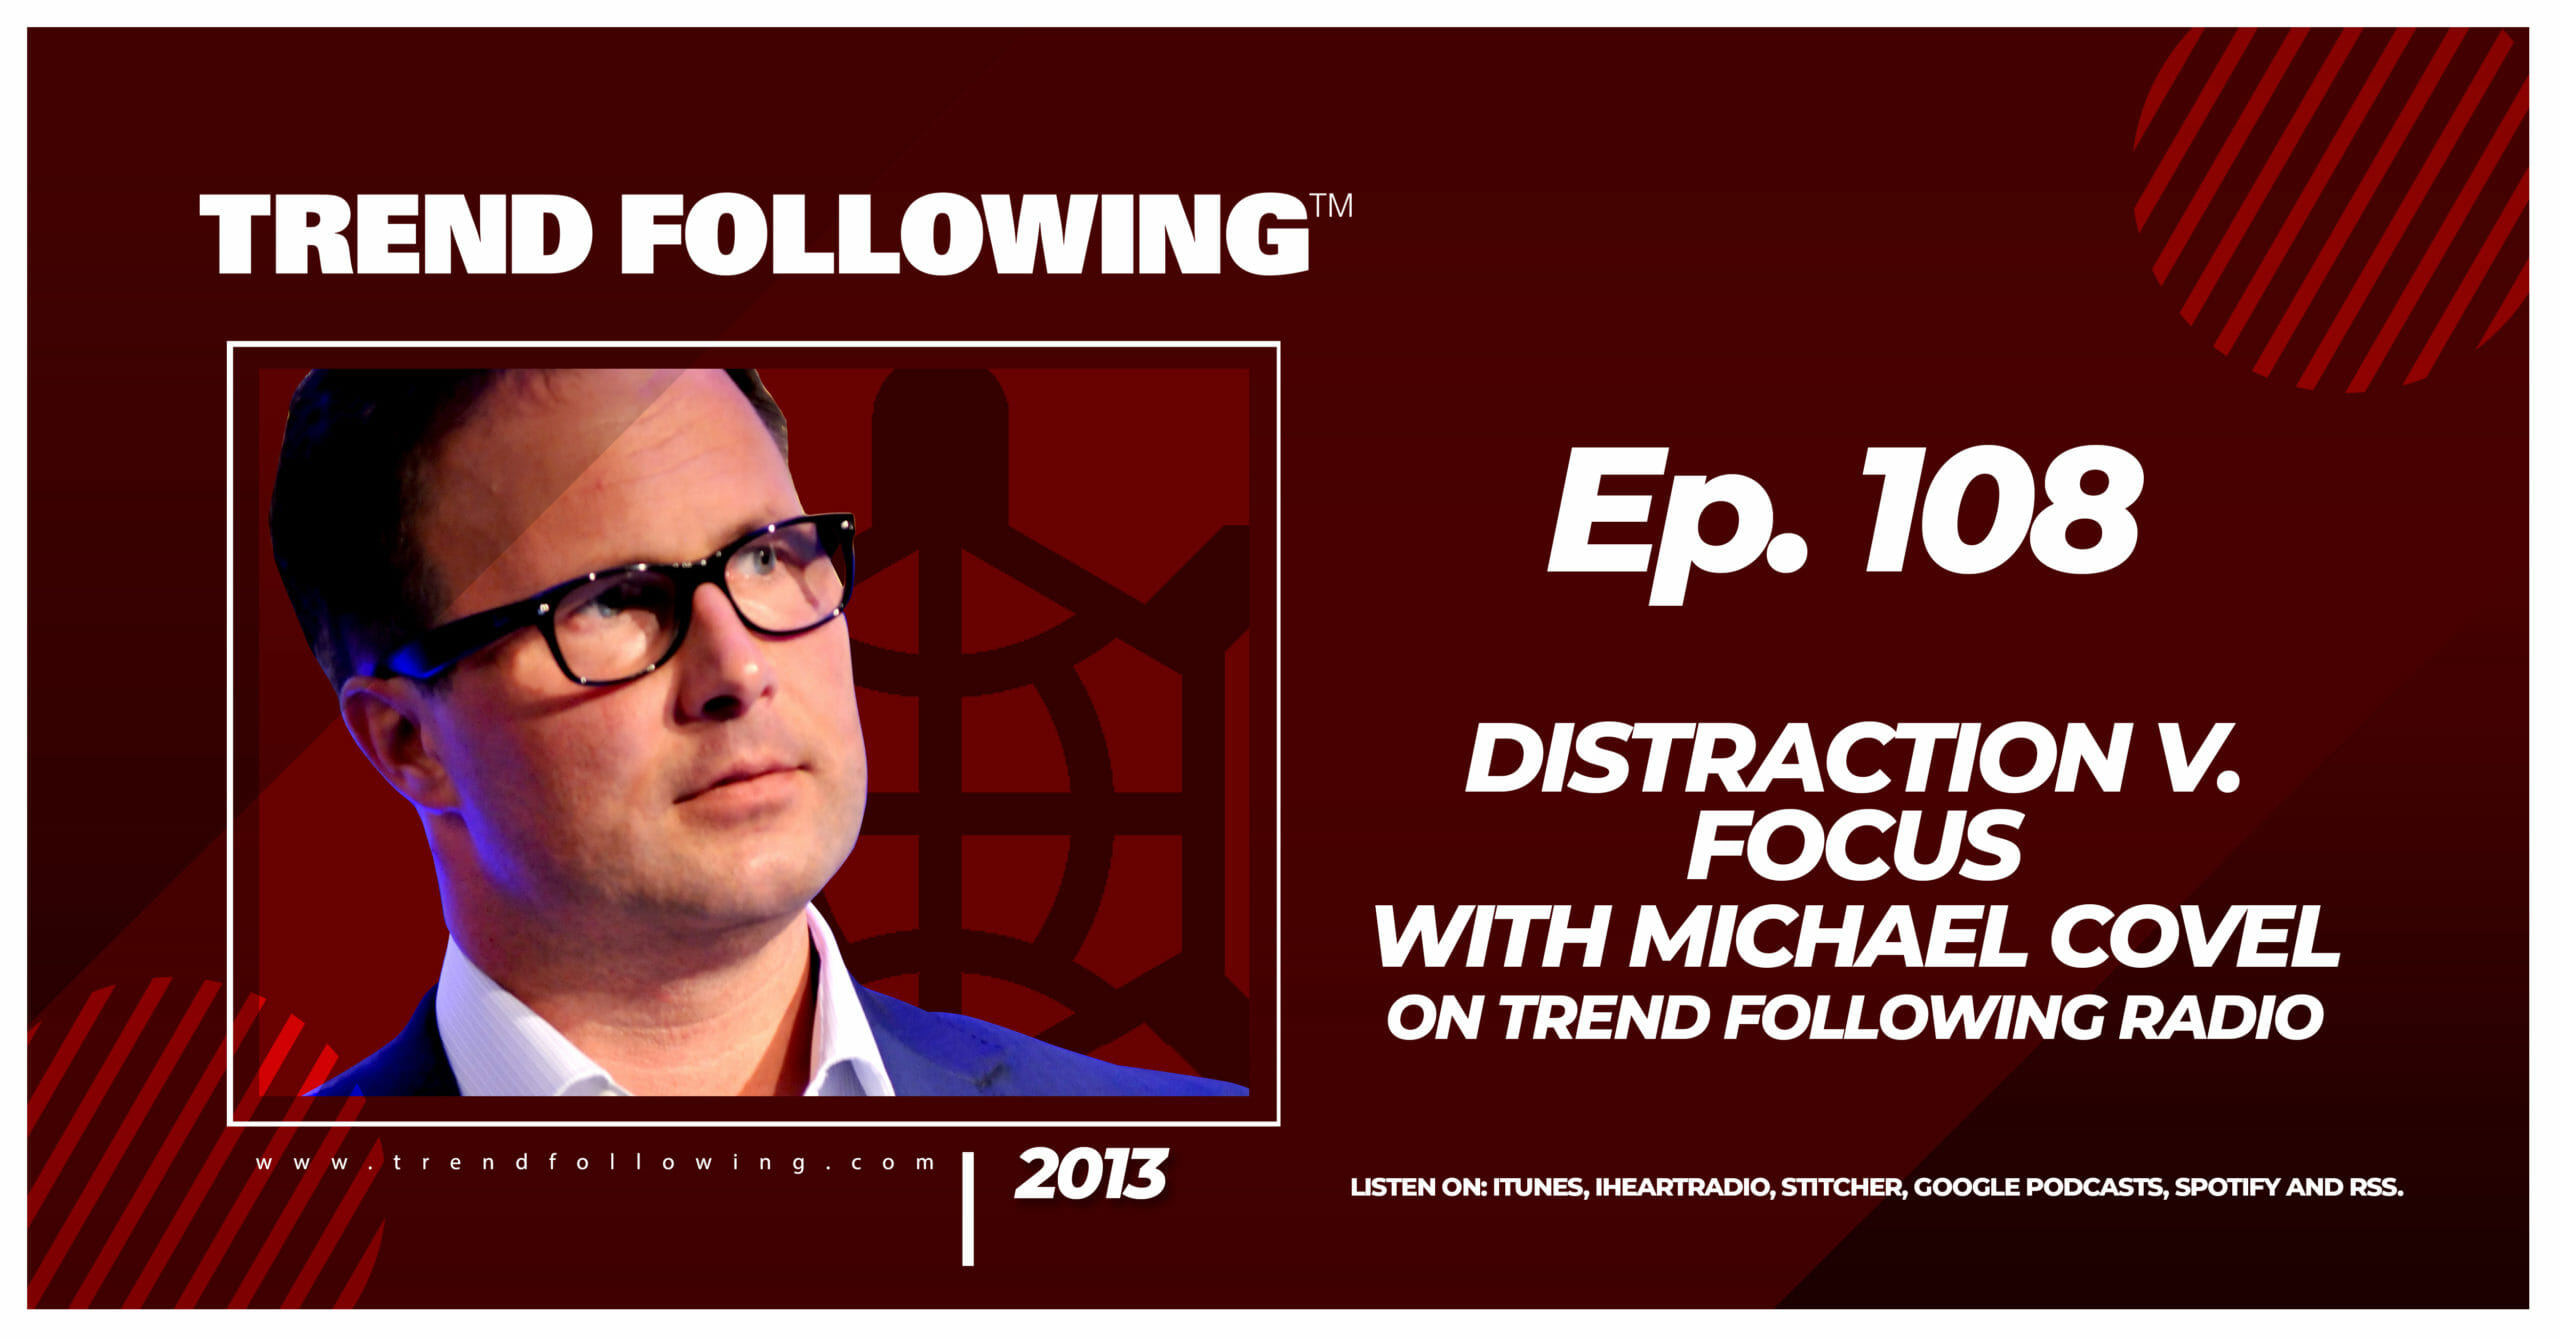 Distraction v. Focus with Michael Covel on Trend Following Radio